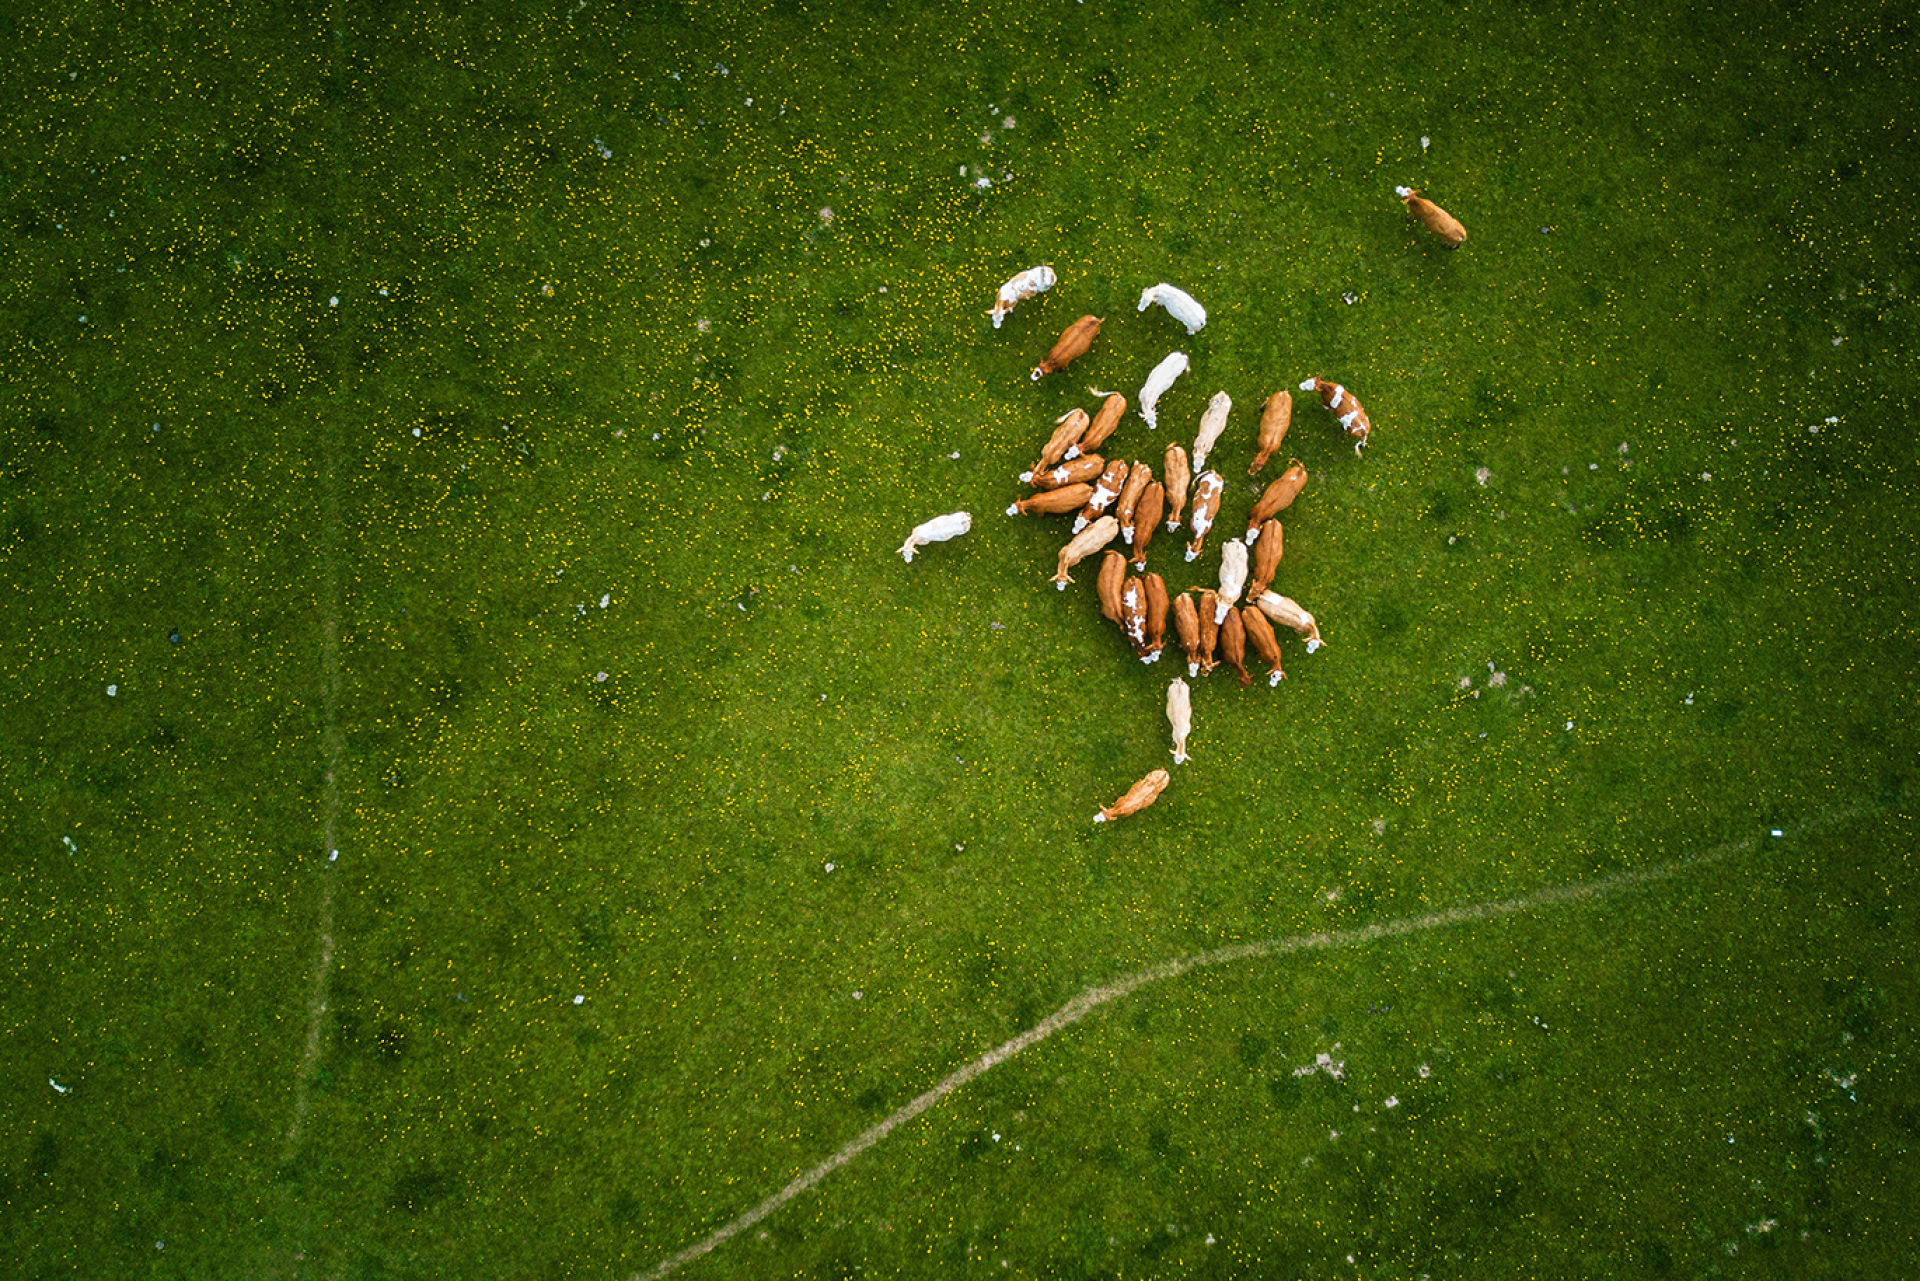 Drone shot of a group of cattle in grass pasture